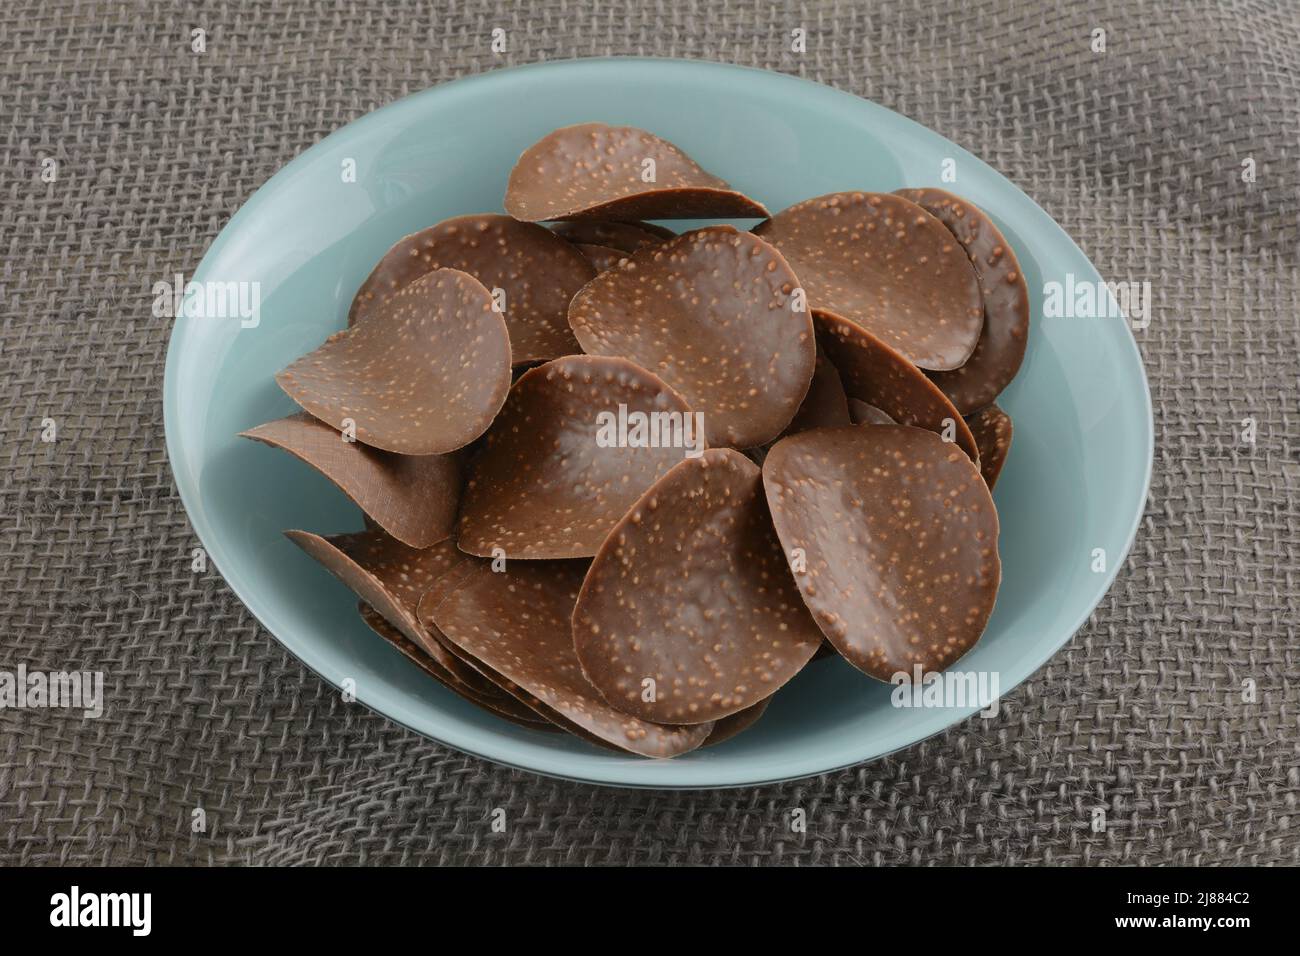 Chocolate covered chip crisps in blue snack bowl on gray burlap Stock Photo